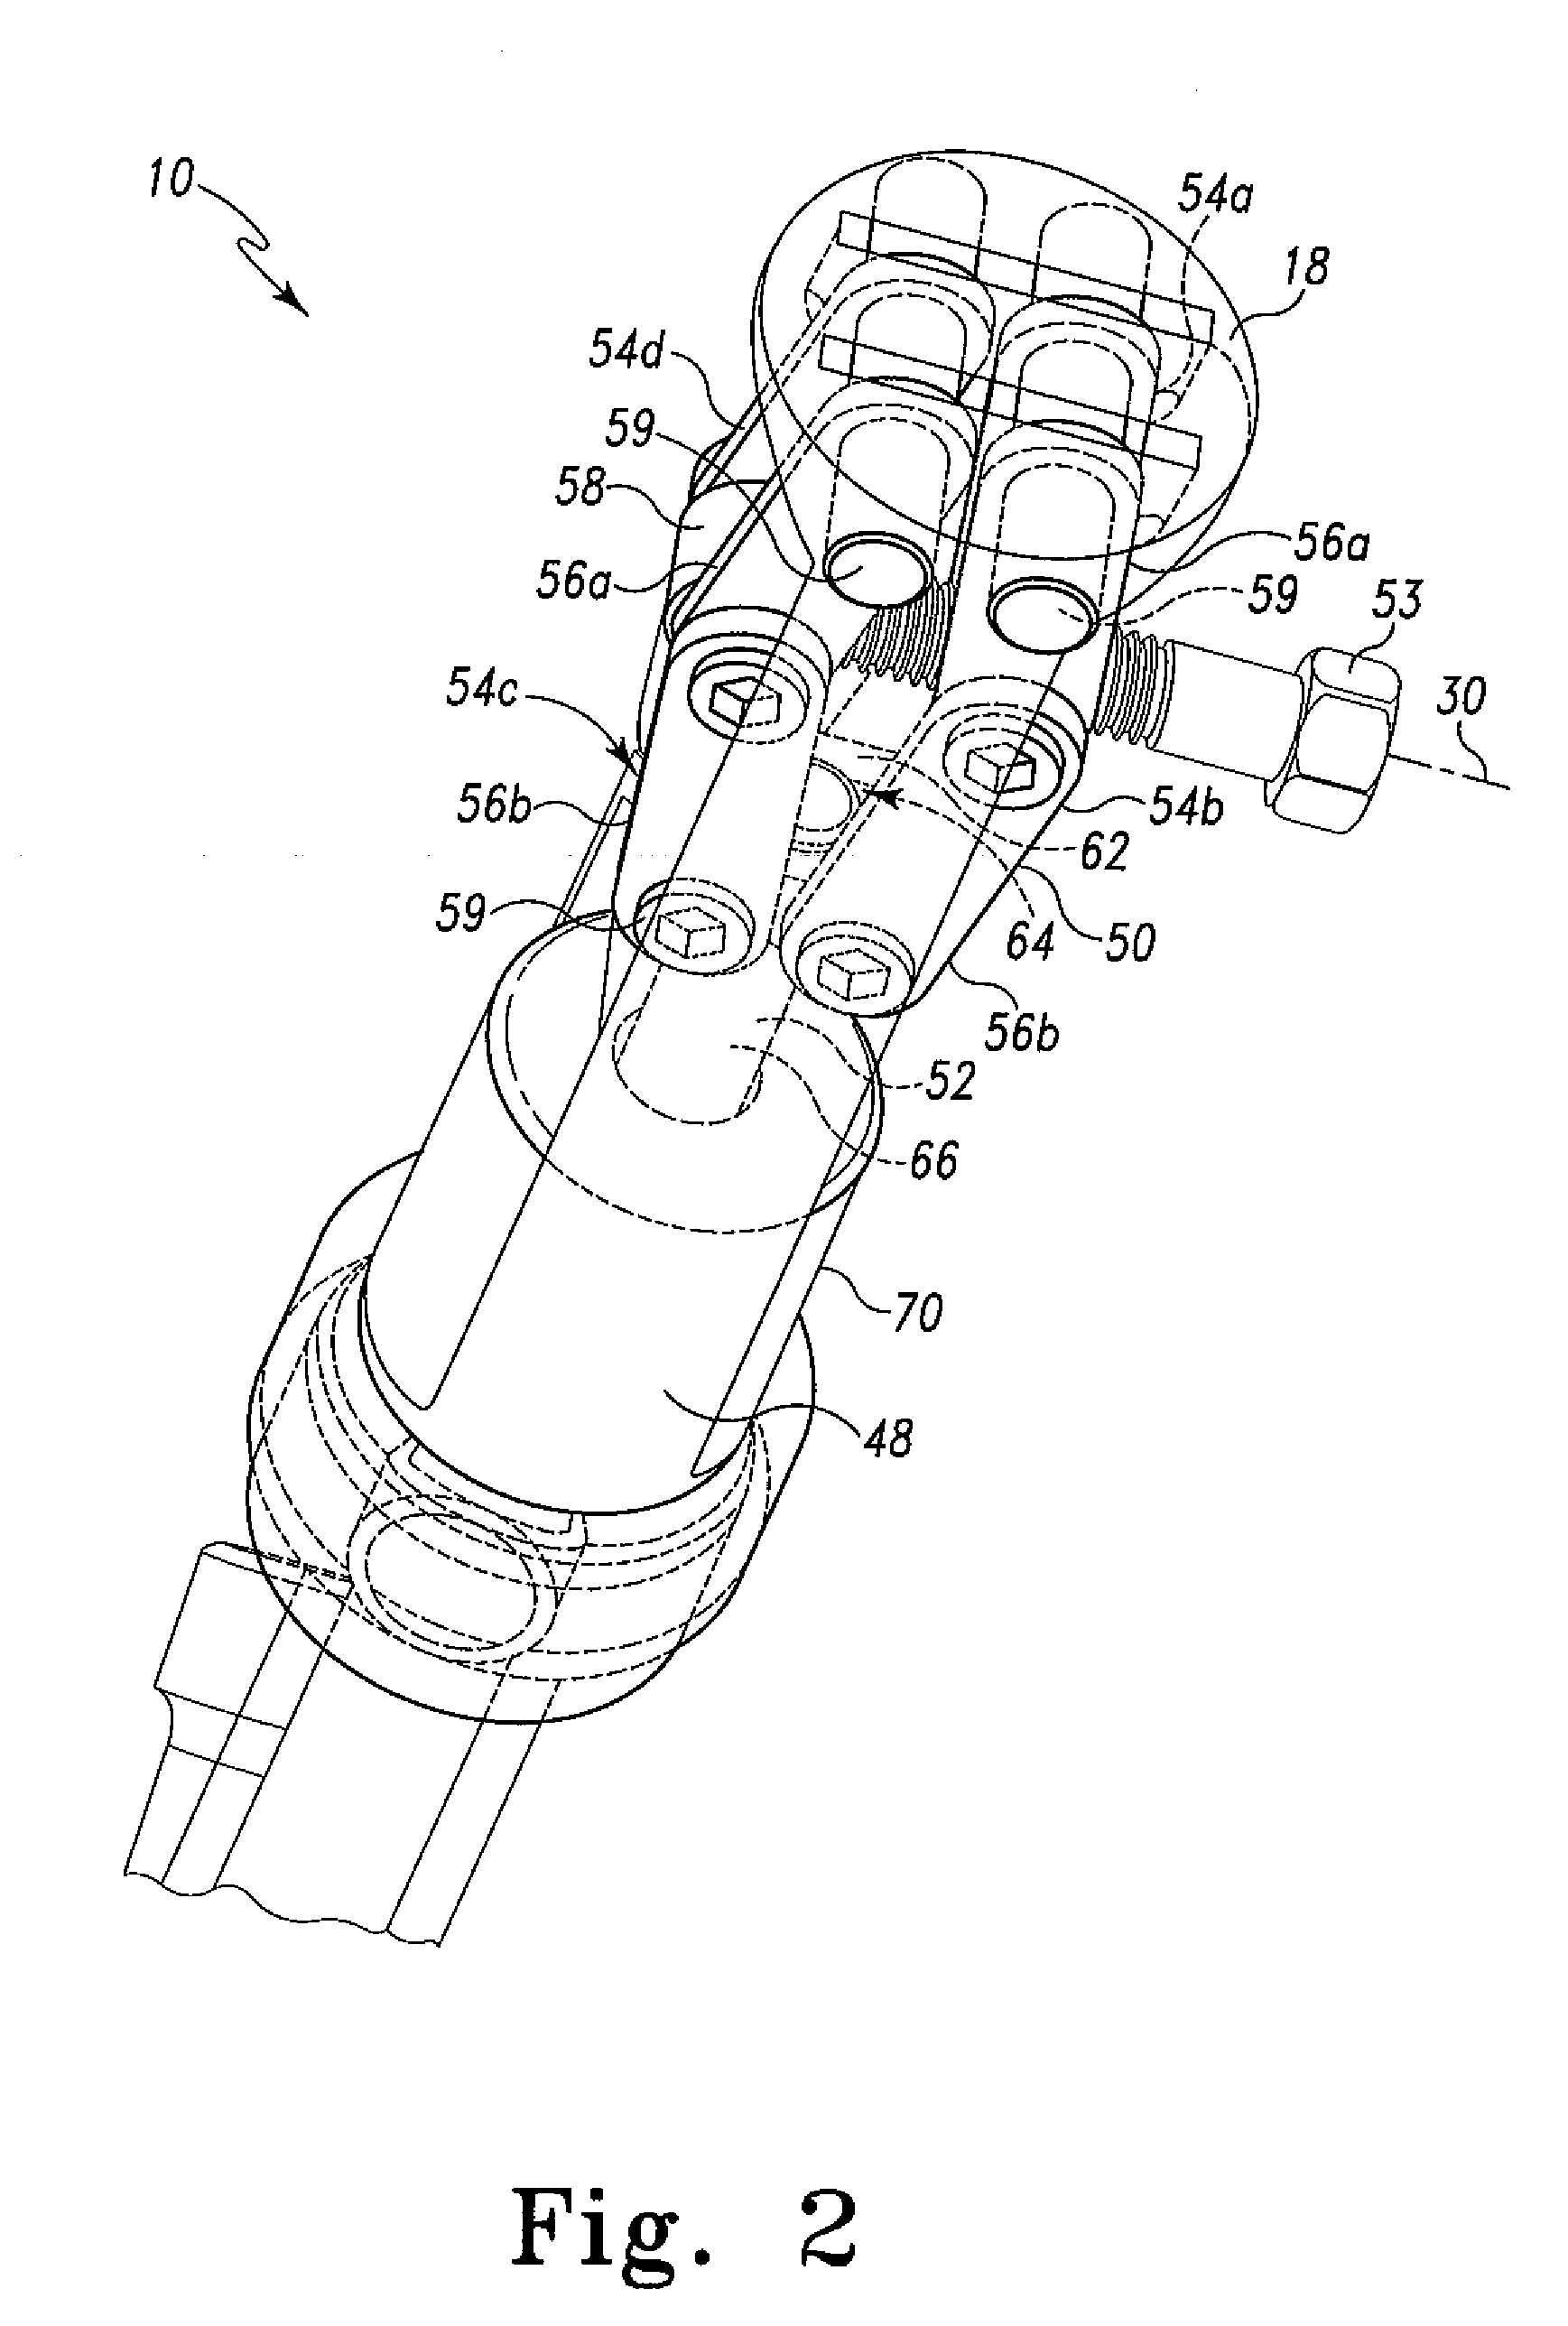 Modular taper assembly device